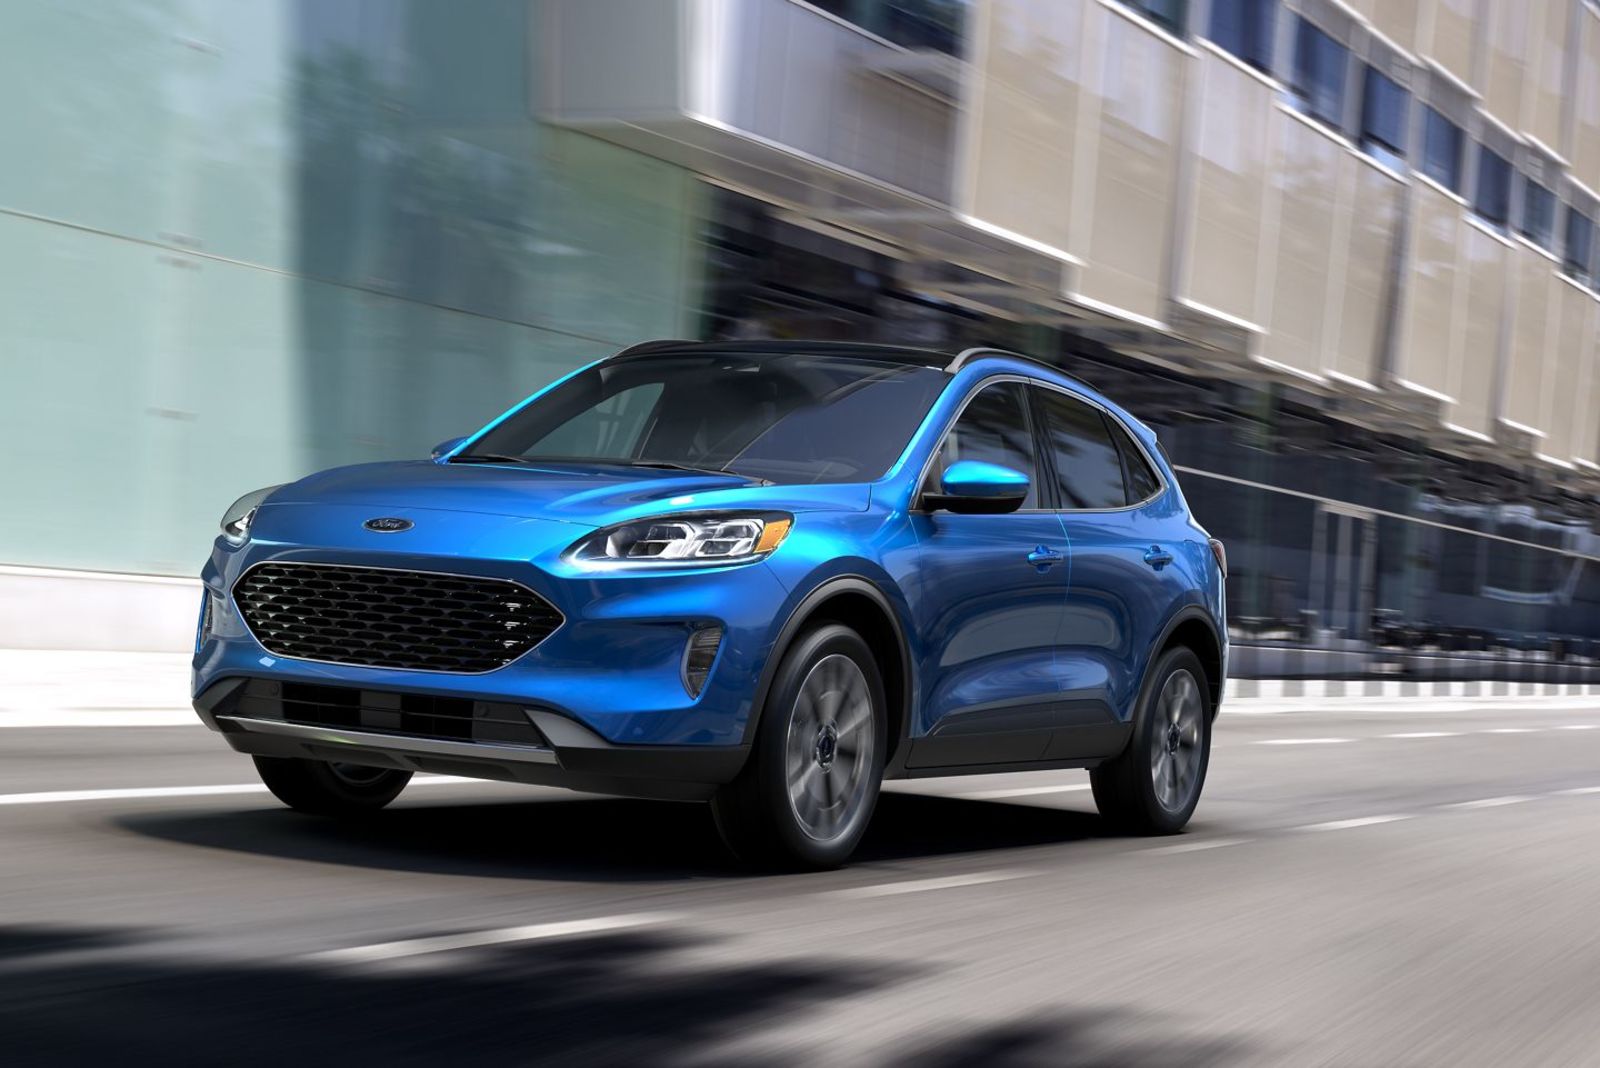 Illustration for article titled 2020 Ford Escape starts at $24,885